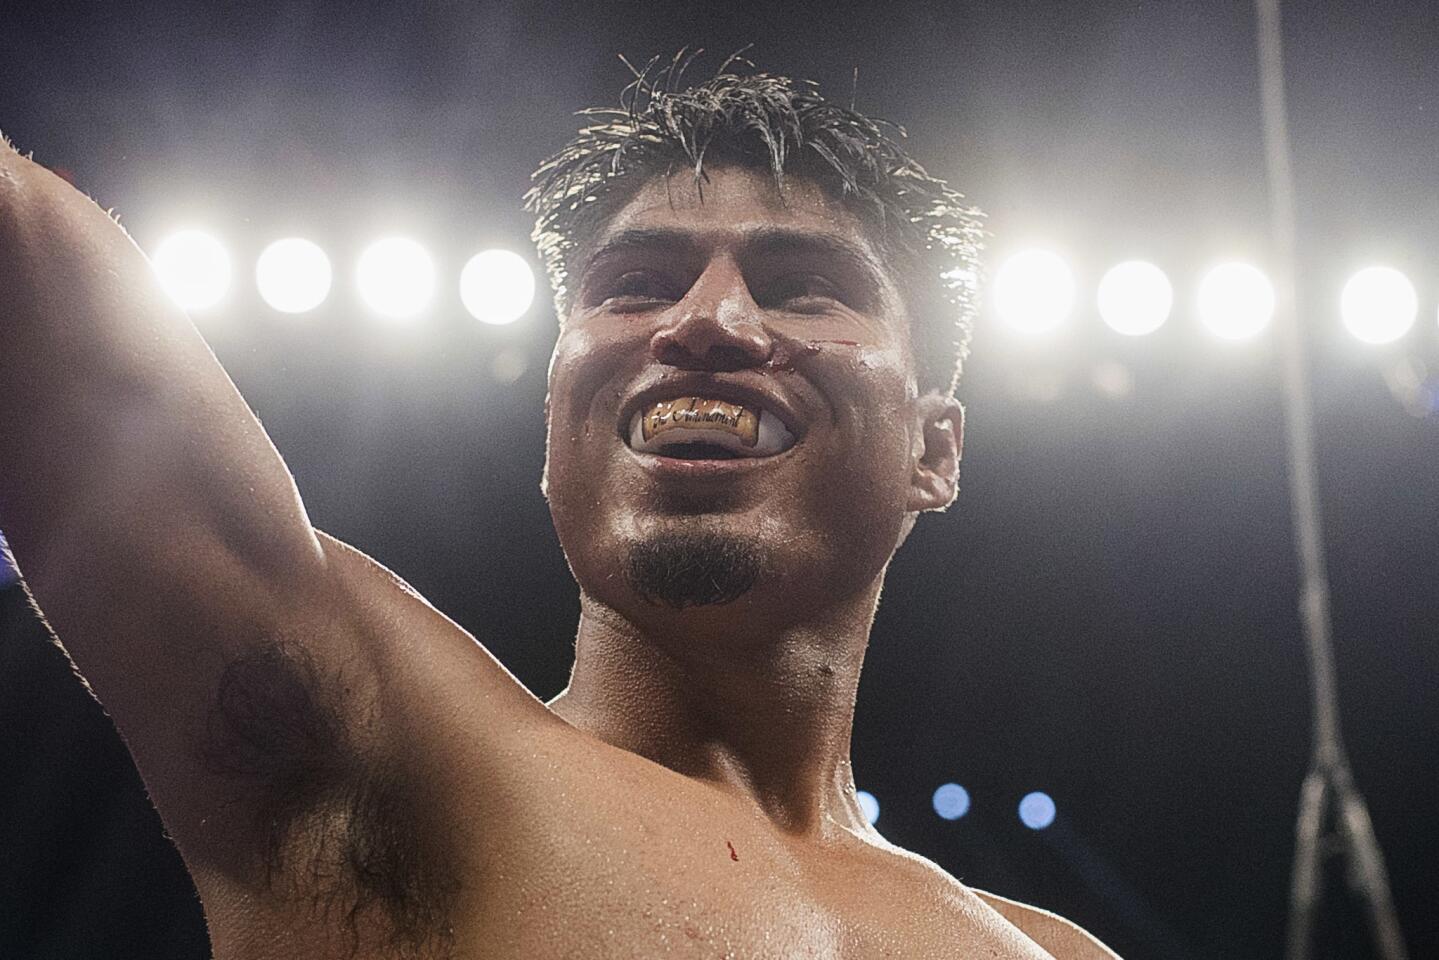 Mikey Garcia, celebrates his victory over Adrien Broner during a 140-pound boxing box bout Saturday, July 29, 2017, in New York. (AP Photo/Andres Kudacki)